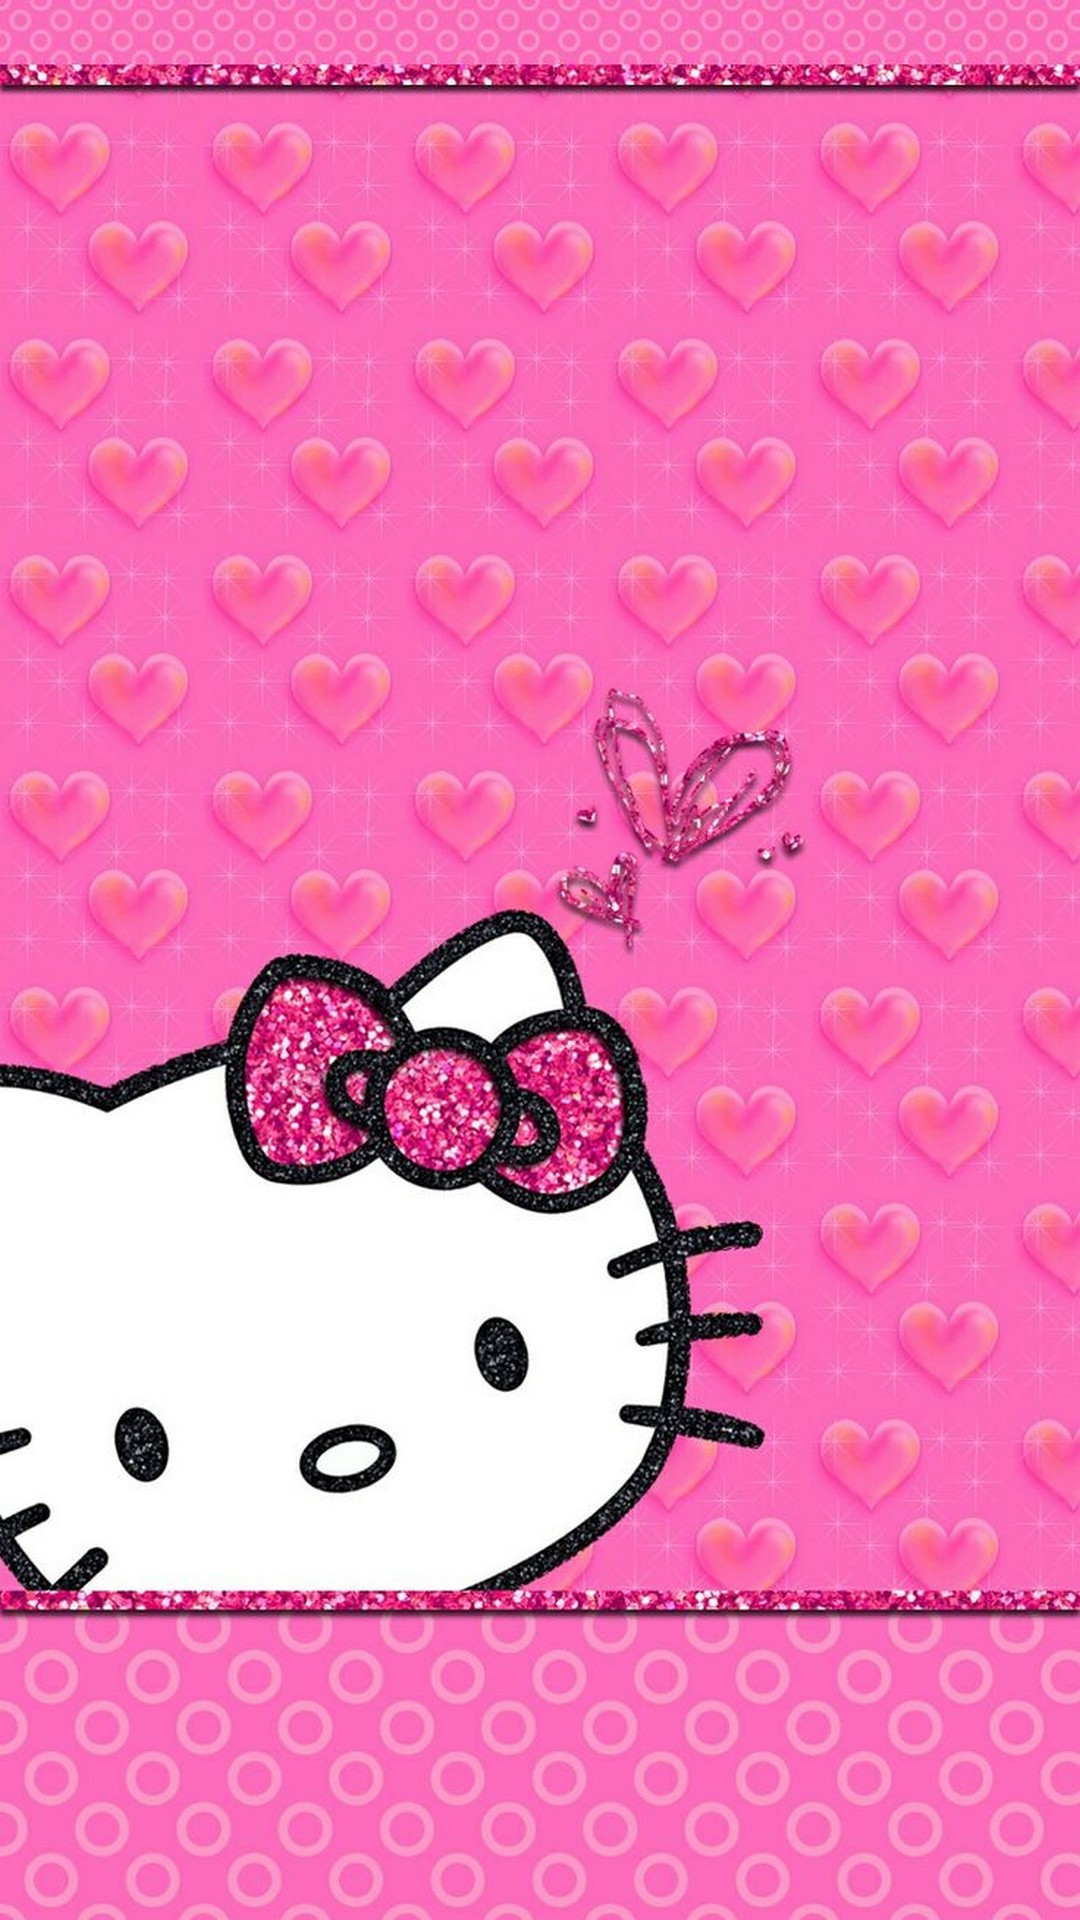 Hello Kitty Images Wallpaper For Android with image resolution 1080x1920 pixel. You can make this wallpaper for your Android backgrounds, Tablet, Smartphones Screensavers and Mobile Phone Lock Screen